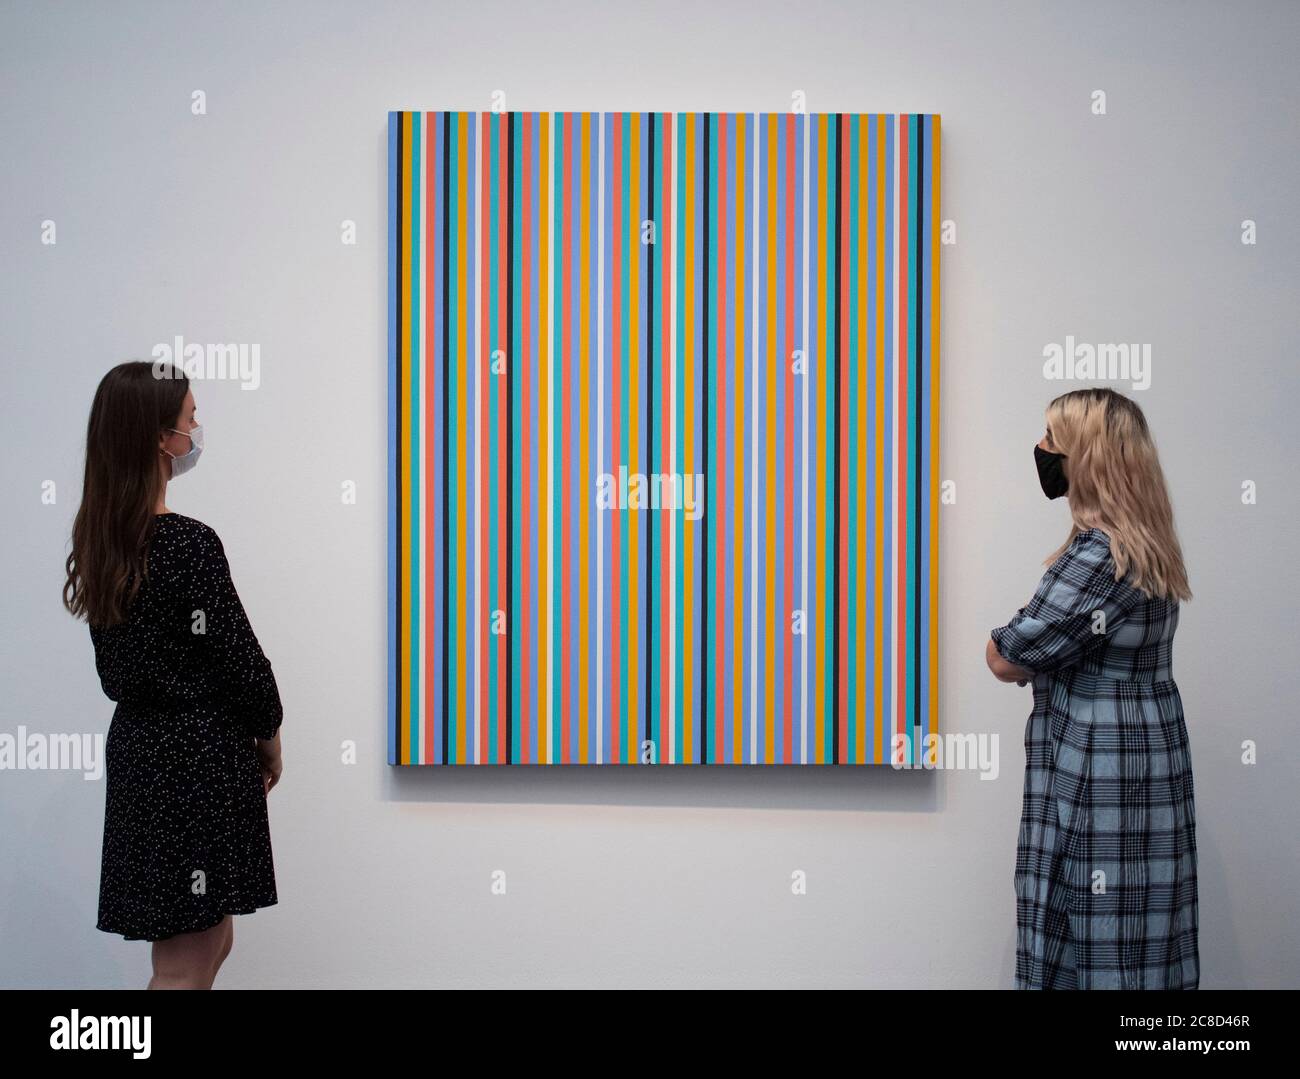 Sotheby’s, London, UK. 23 July 2020. Preview of Sotheby’s one-off auction and exhibition spanning half a millenium of art history from Rembrandt to Richter at a socially-distanced photocall. Image: Bridget Riley, Cool Edge, 1982, estimate £800,000-1.2 million. From the collection of British Airways, this is one of the finest examples of the artist’s stripe paintings from the 1980s, bearing the hallmark hues of the artist’s ‘Egyptian palette’ – colours based on ancient Egyptian tomb paintings and local landscapes. Credit: Malcolm Park/Alamy Live News Stock Photo